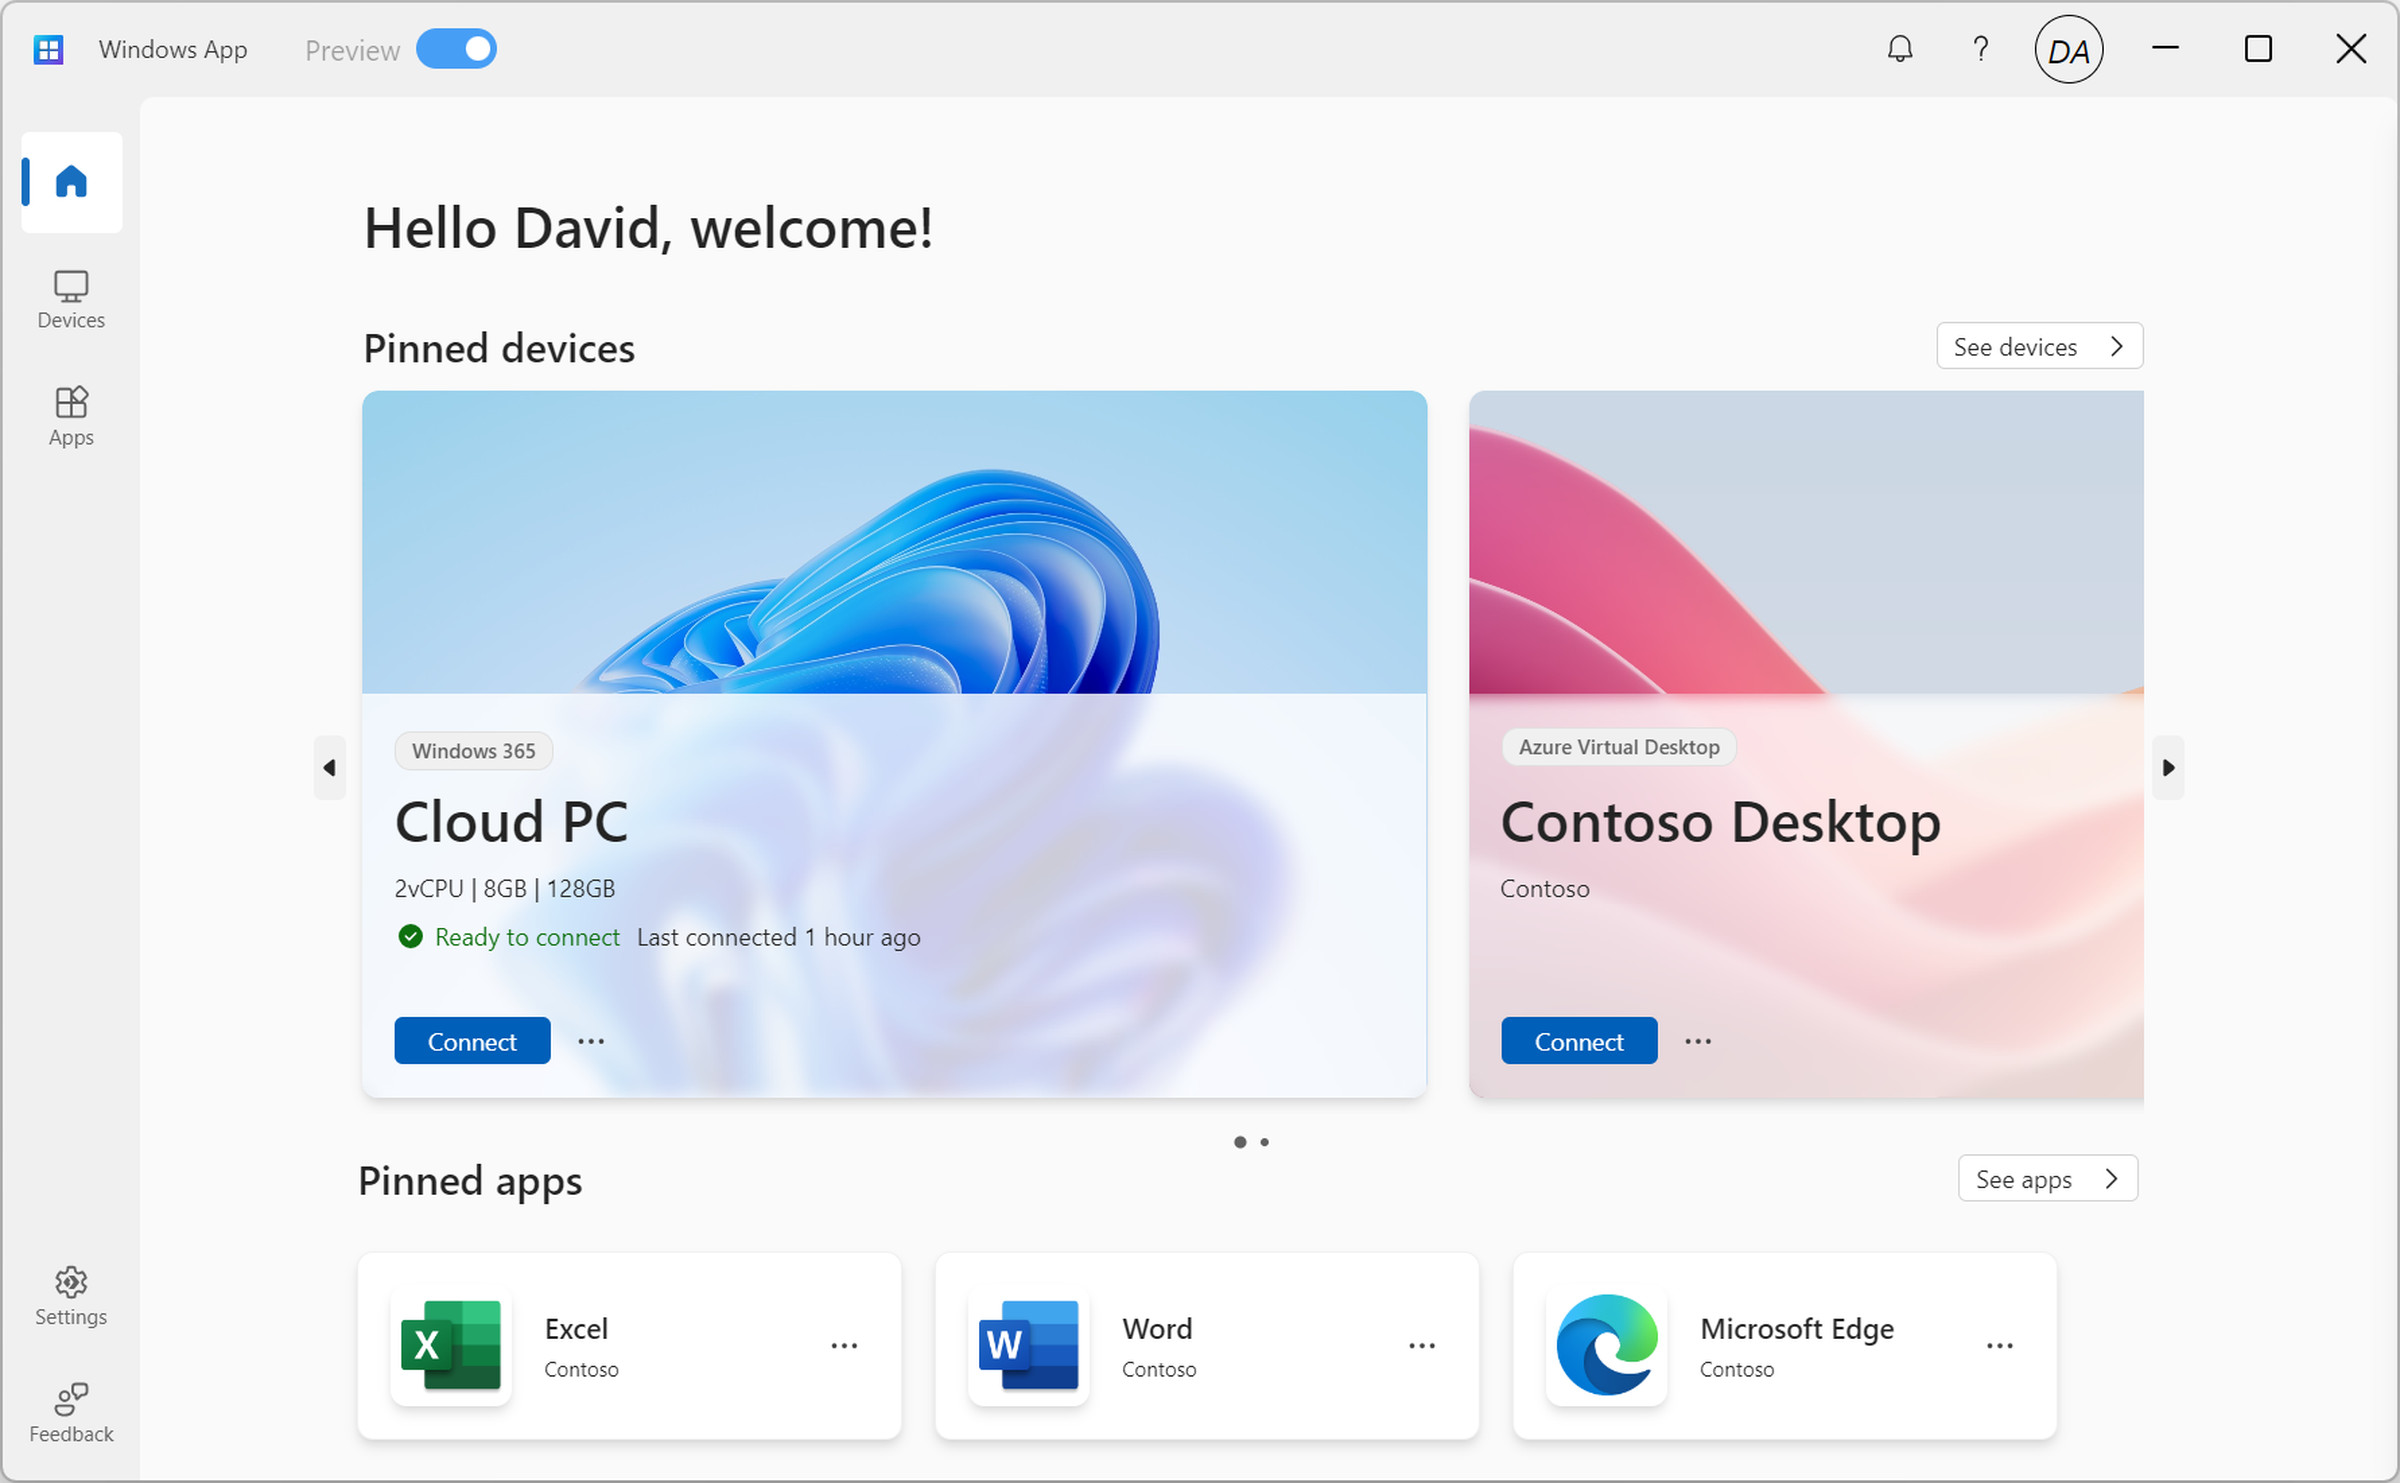 The Windows App acts as a hub to connect to remote and cloud PCs.